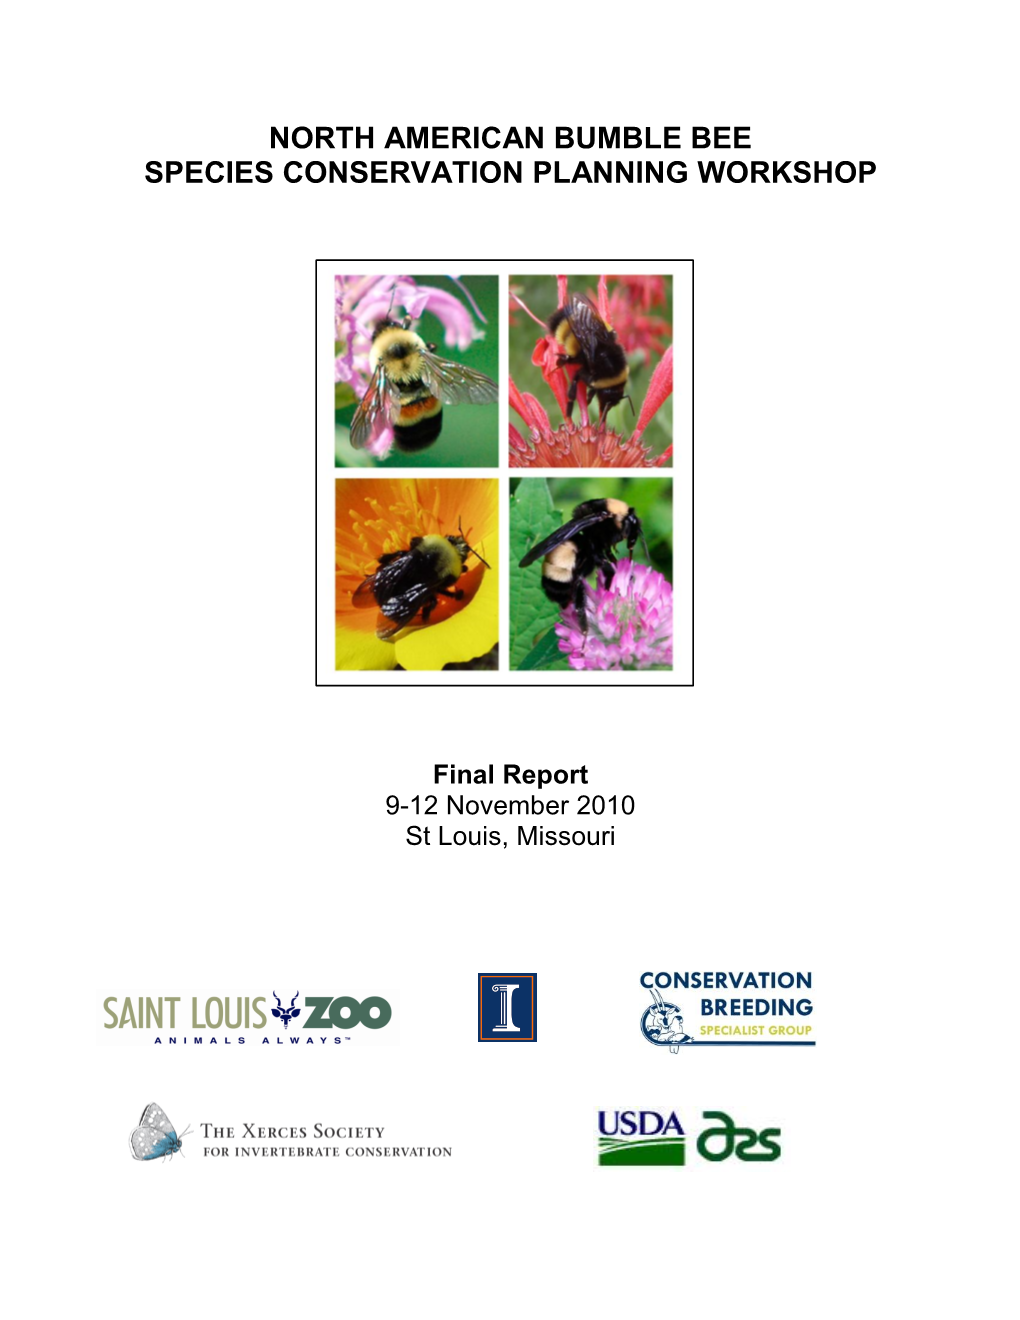 North American Bumble Bee Species Conservation Planning Workshop